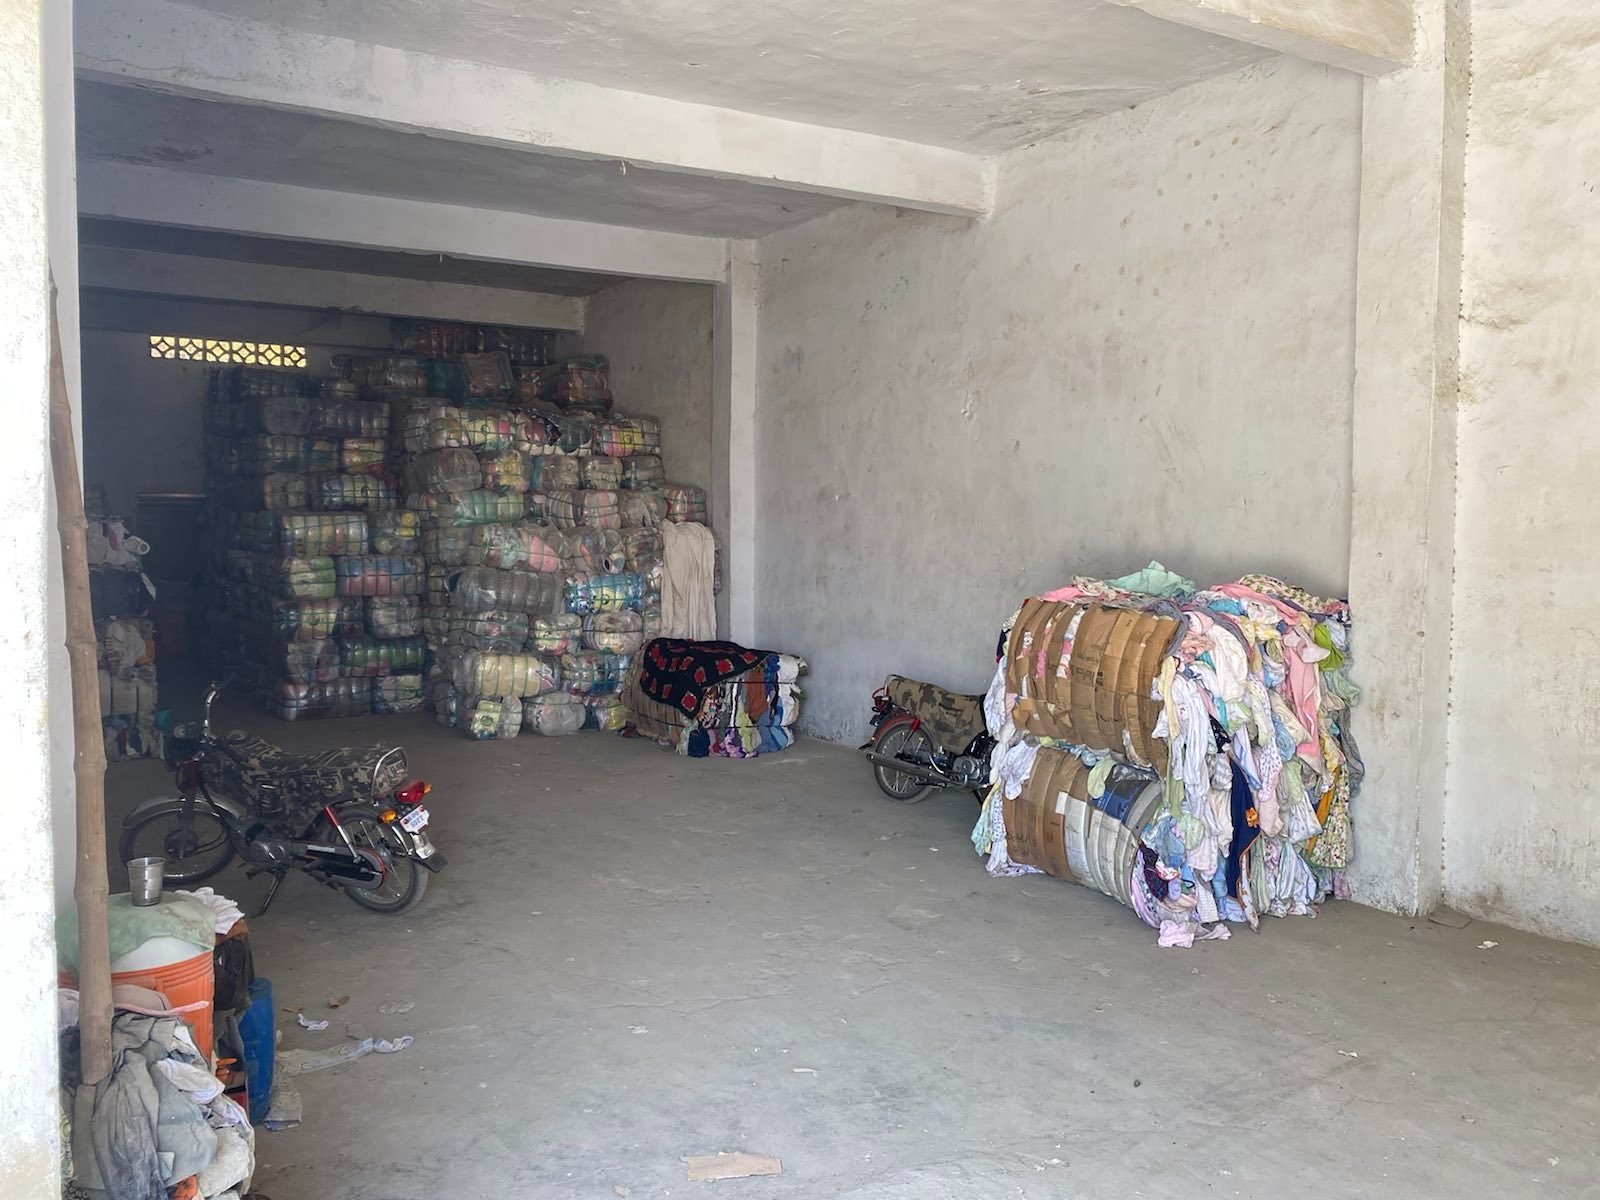  The warehouse of one of the importers of second-hand textile at Shershah Market from where Oštro received a signal from the backpack. Photo: Adil Jawad 